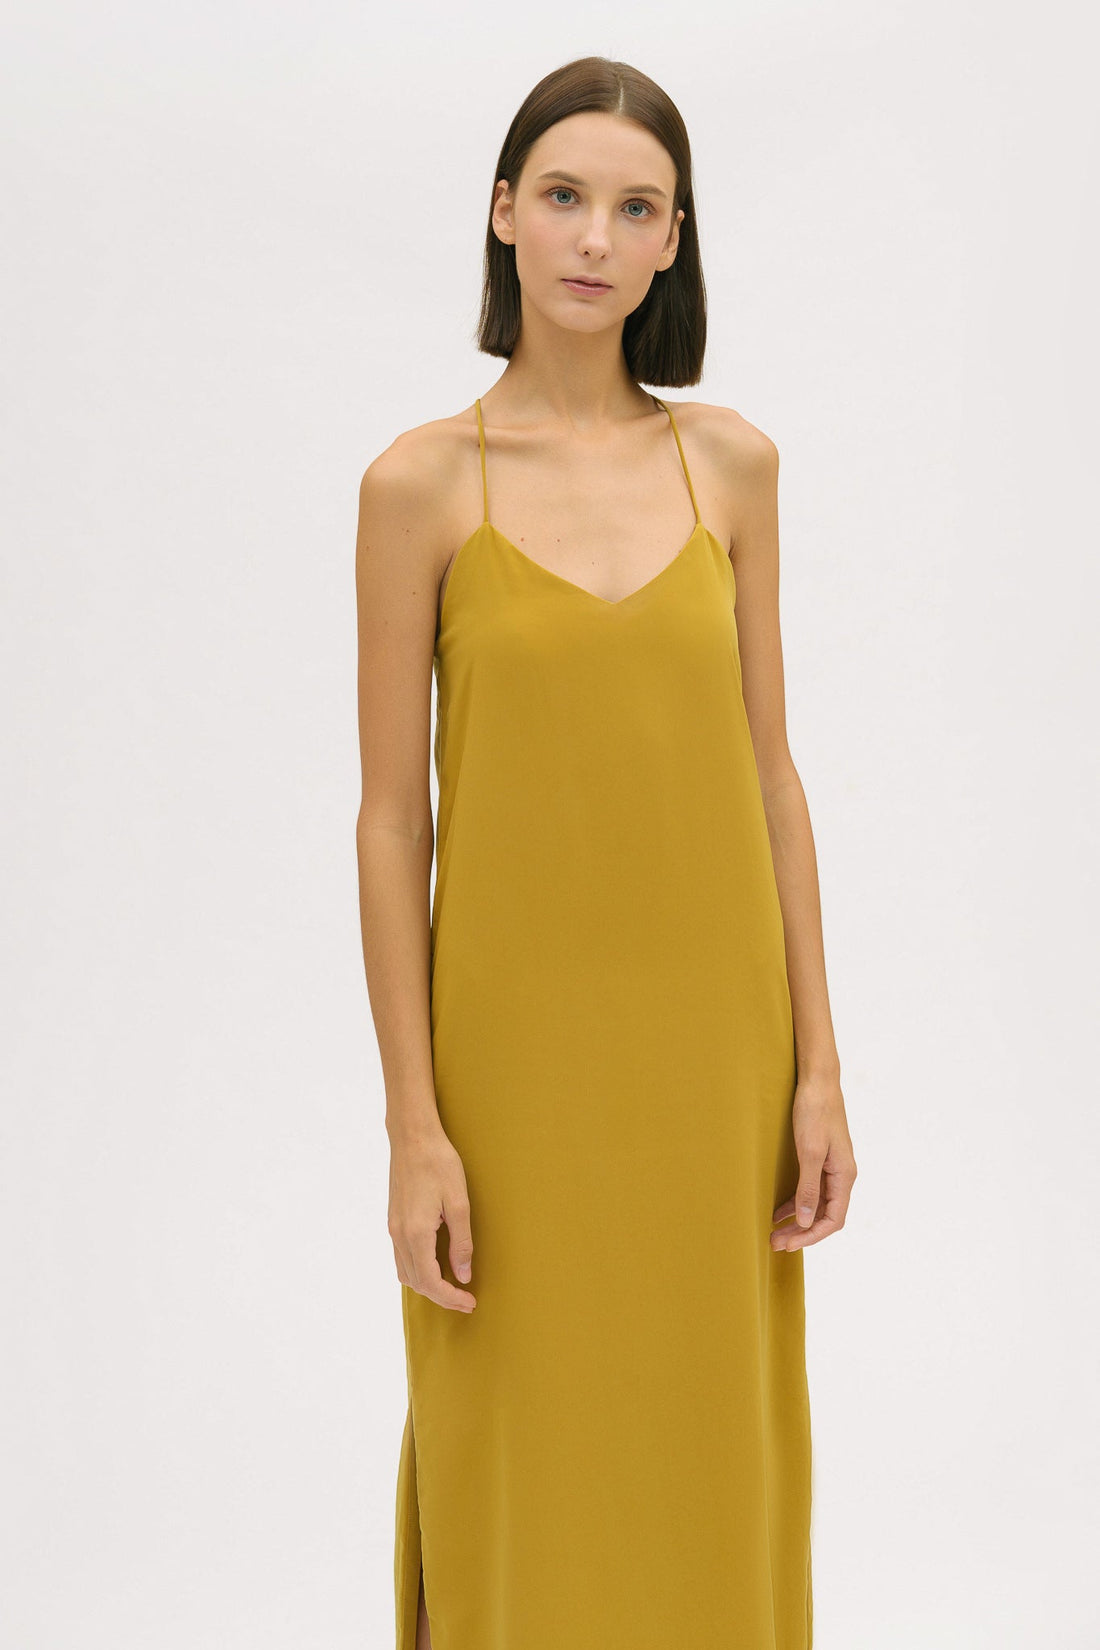 A woman with short brown hair is wearing a long yellow silky dress with straps. She has beige mules on.  Edit alt text